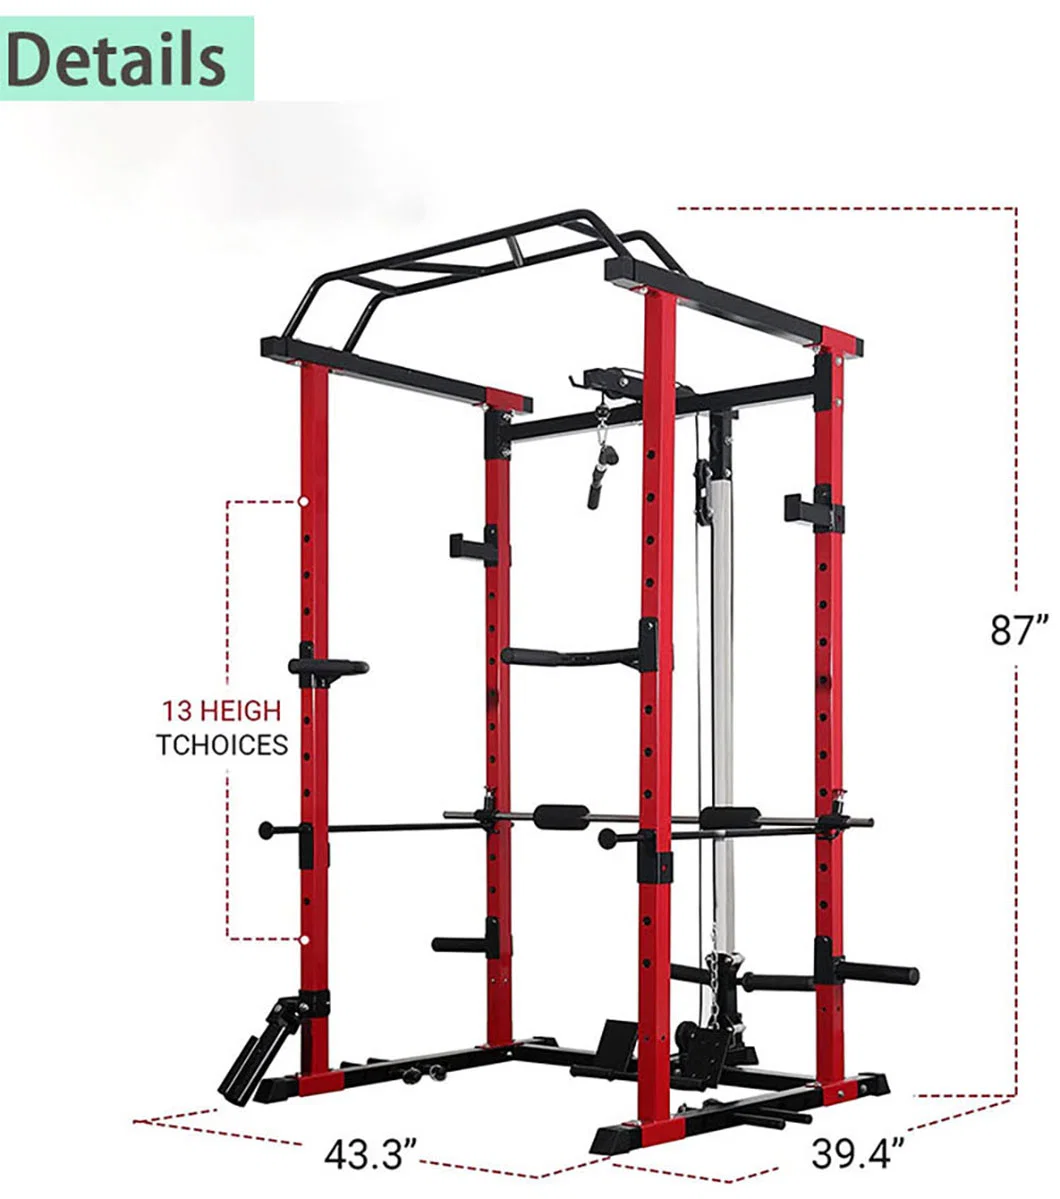 Commercial Folding Half Power Cage Squat Rack for Home Gym Fitness Training Exercise Equipment